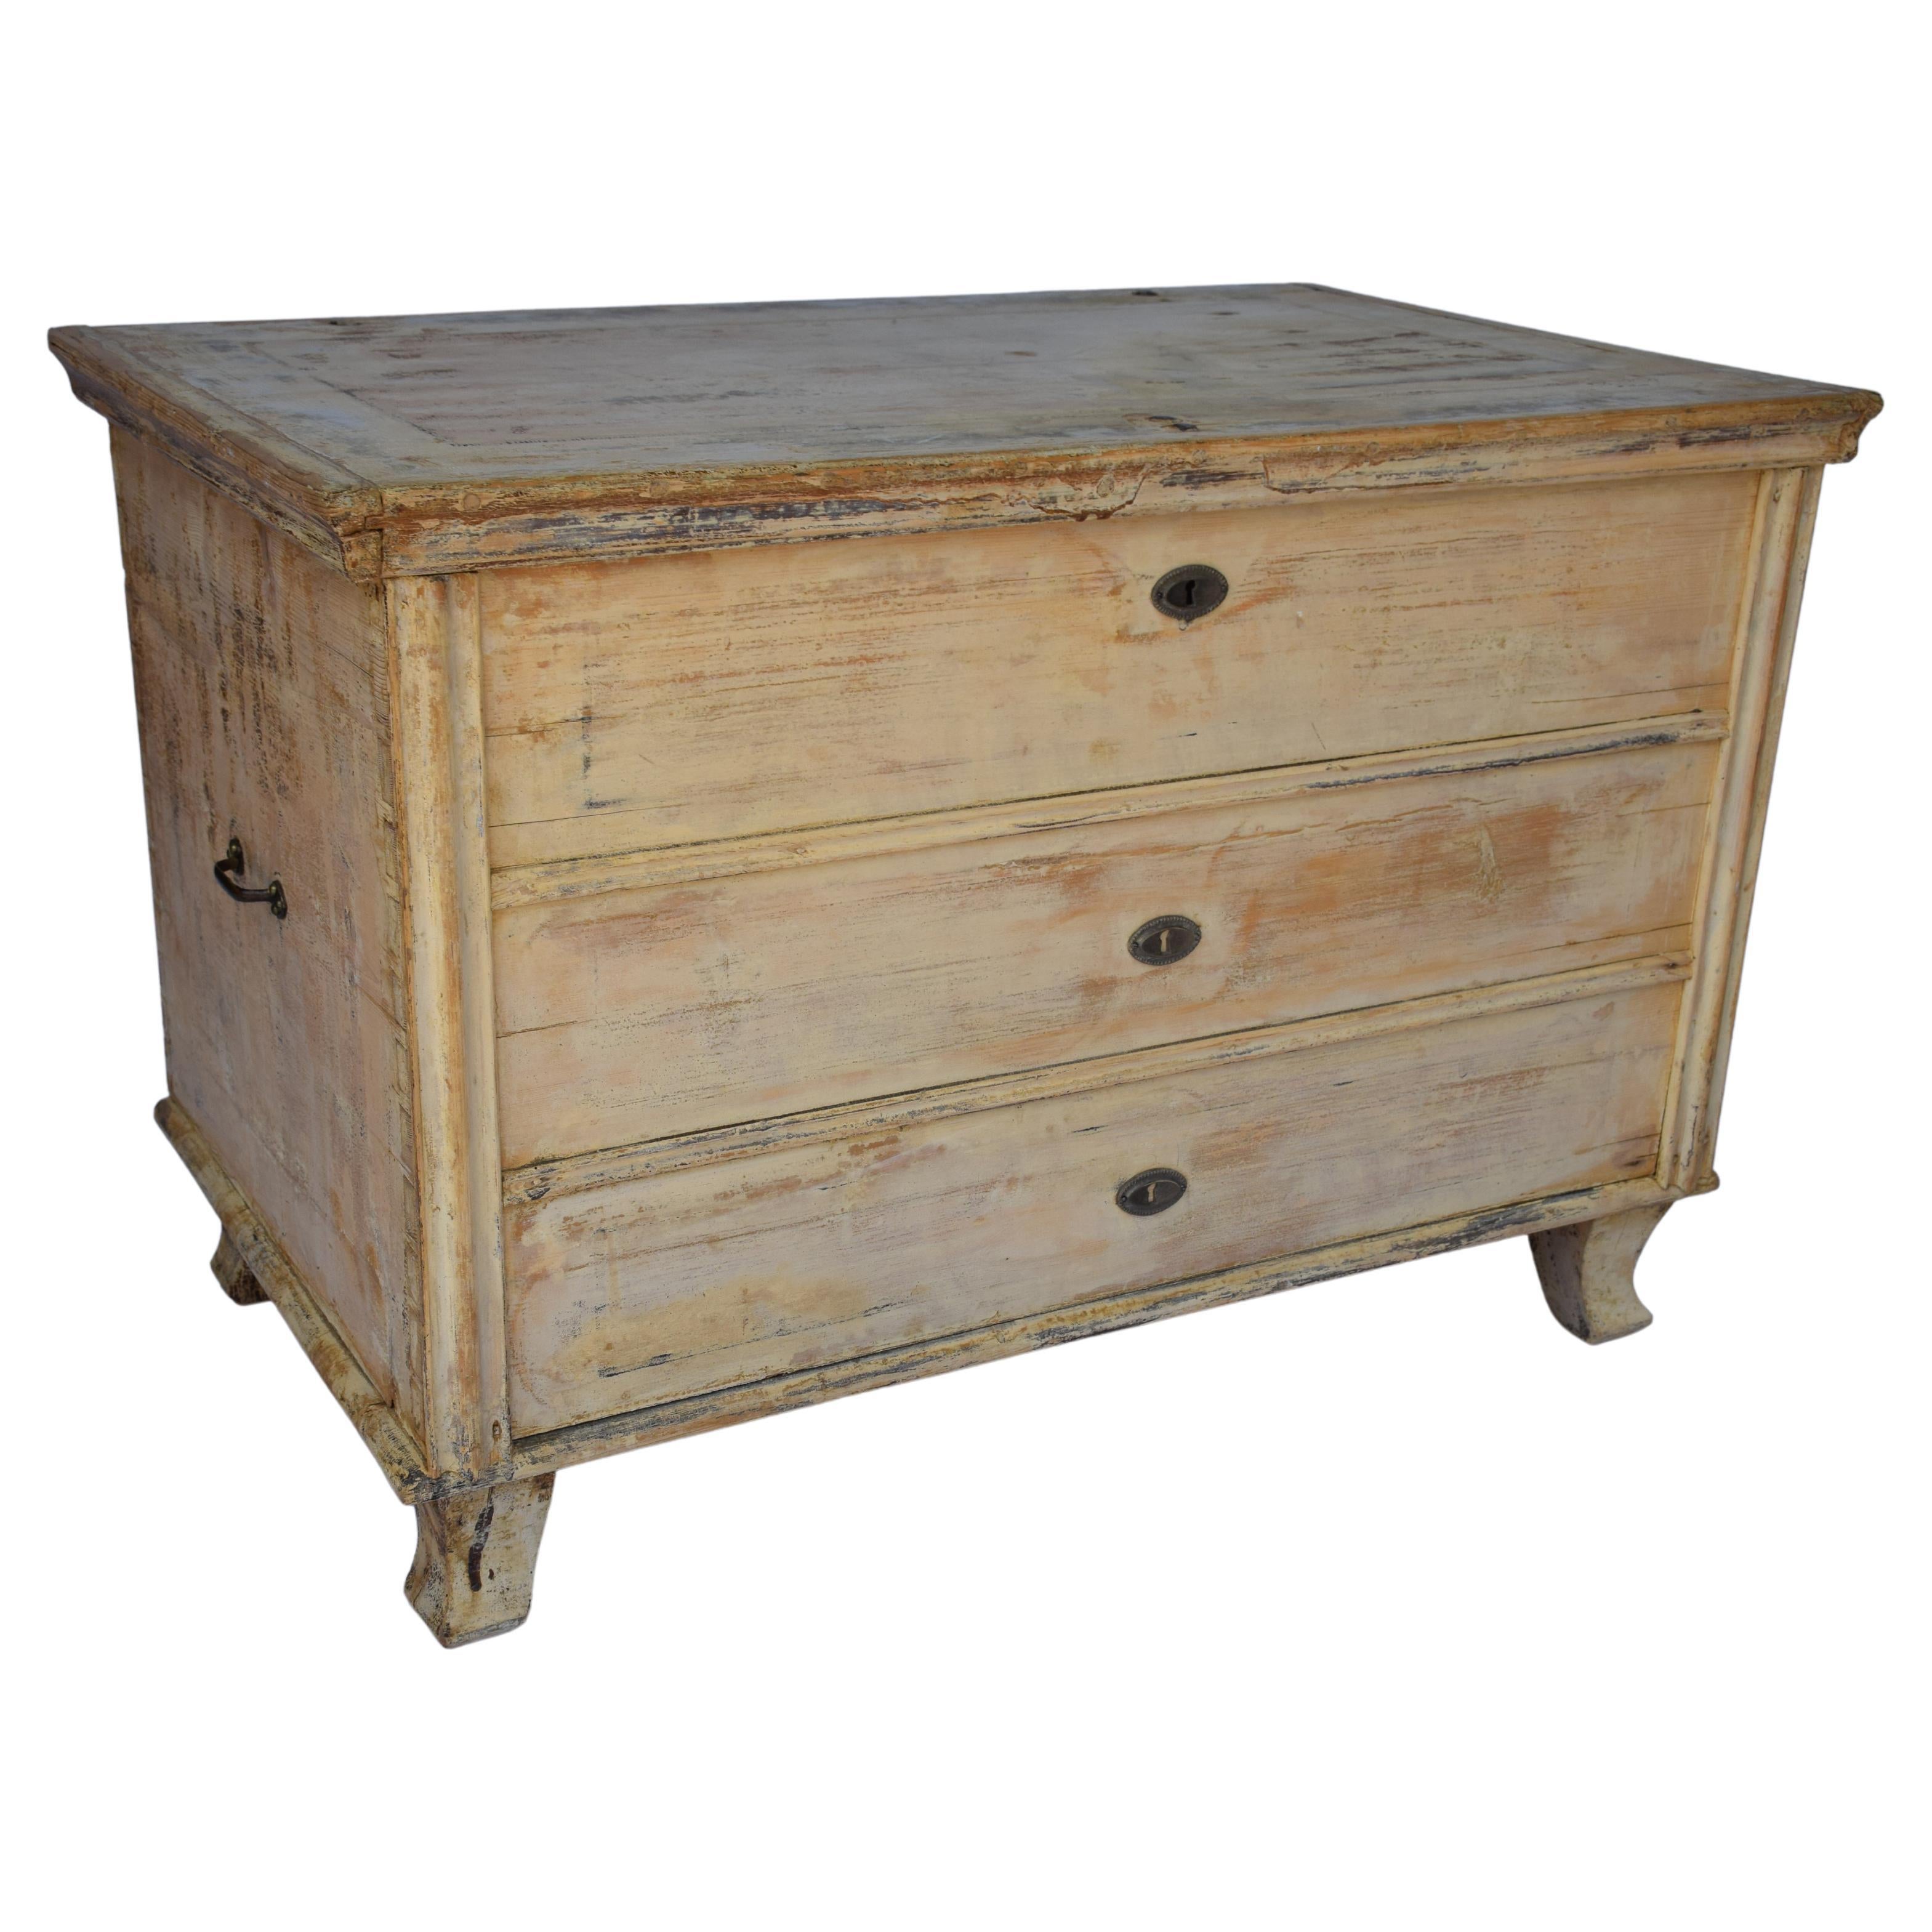 19th Century Antique Painted Flat Top Trunk